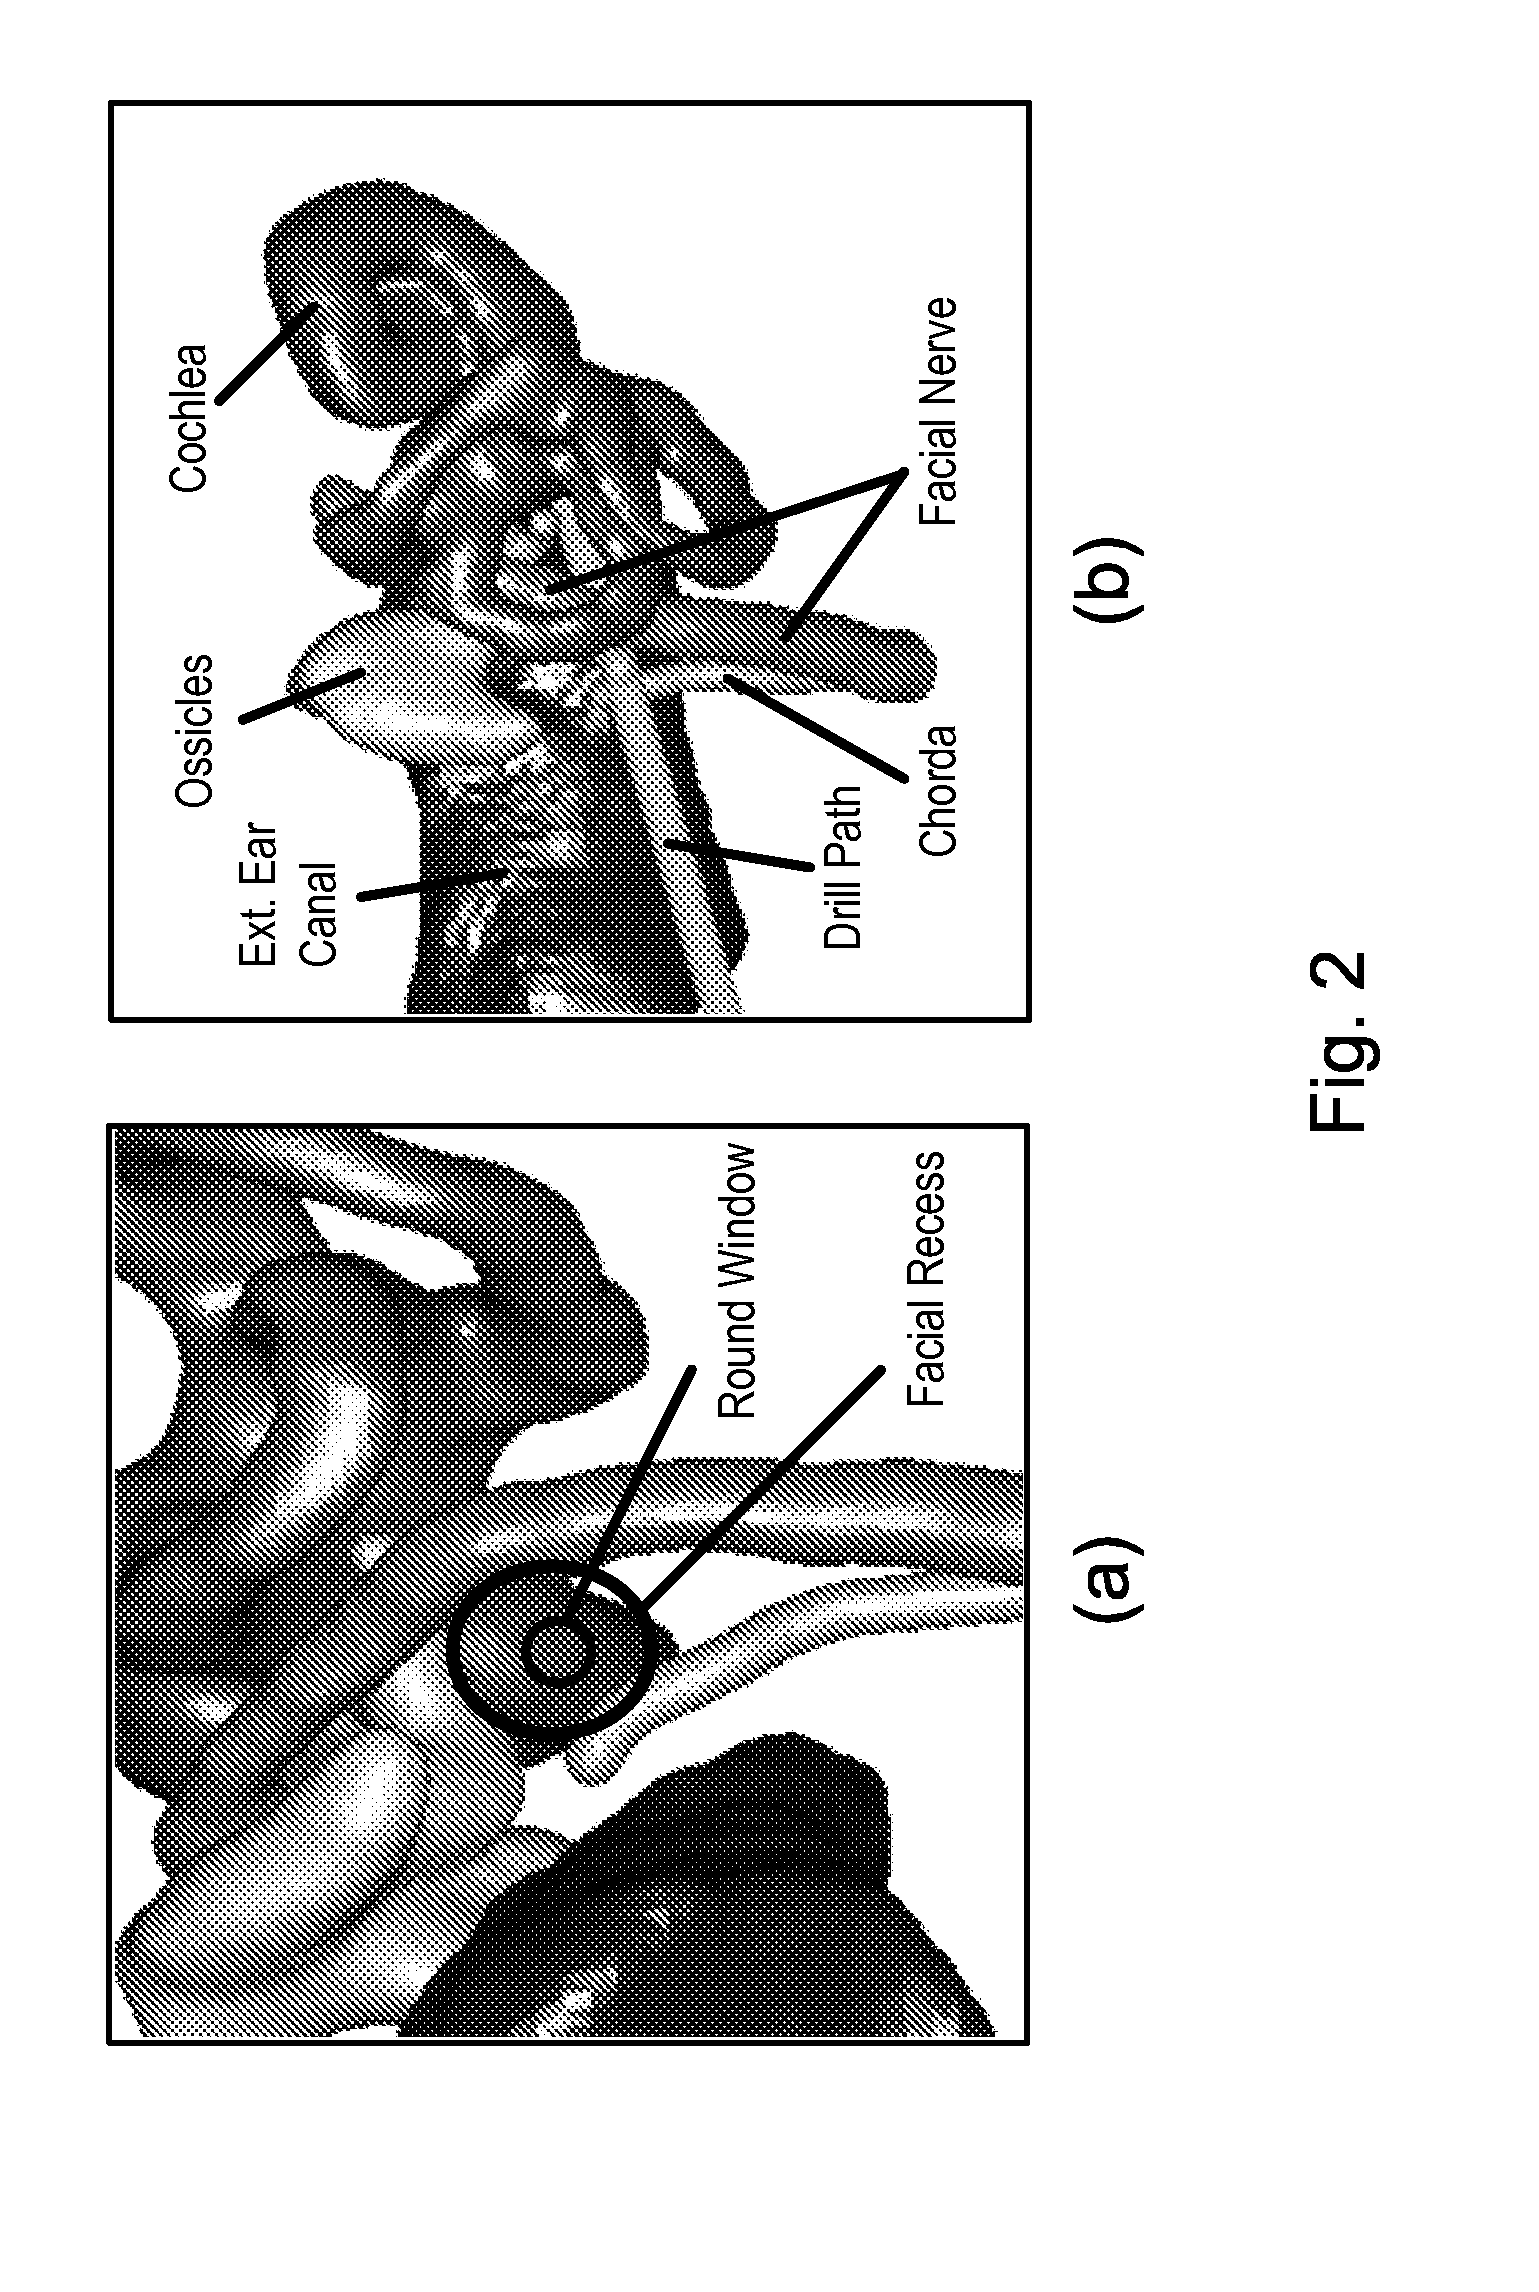 System and methods for automatic segmentation of one or more critical structures of the ear